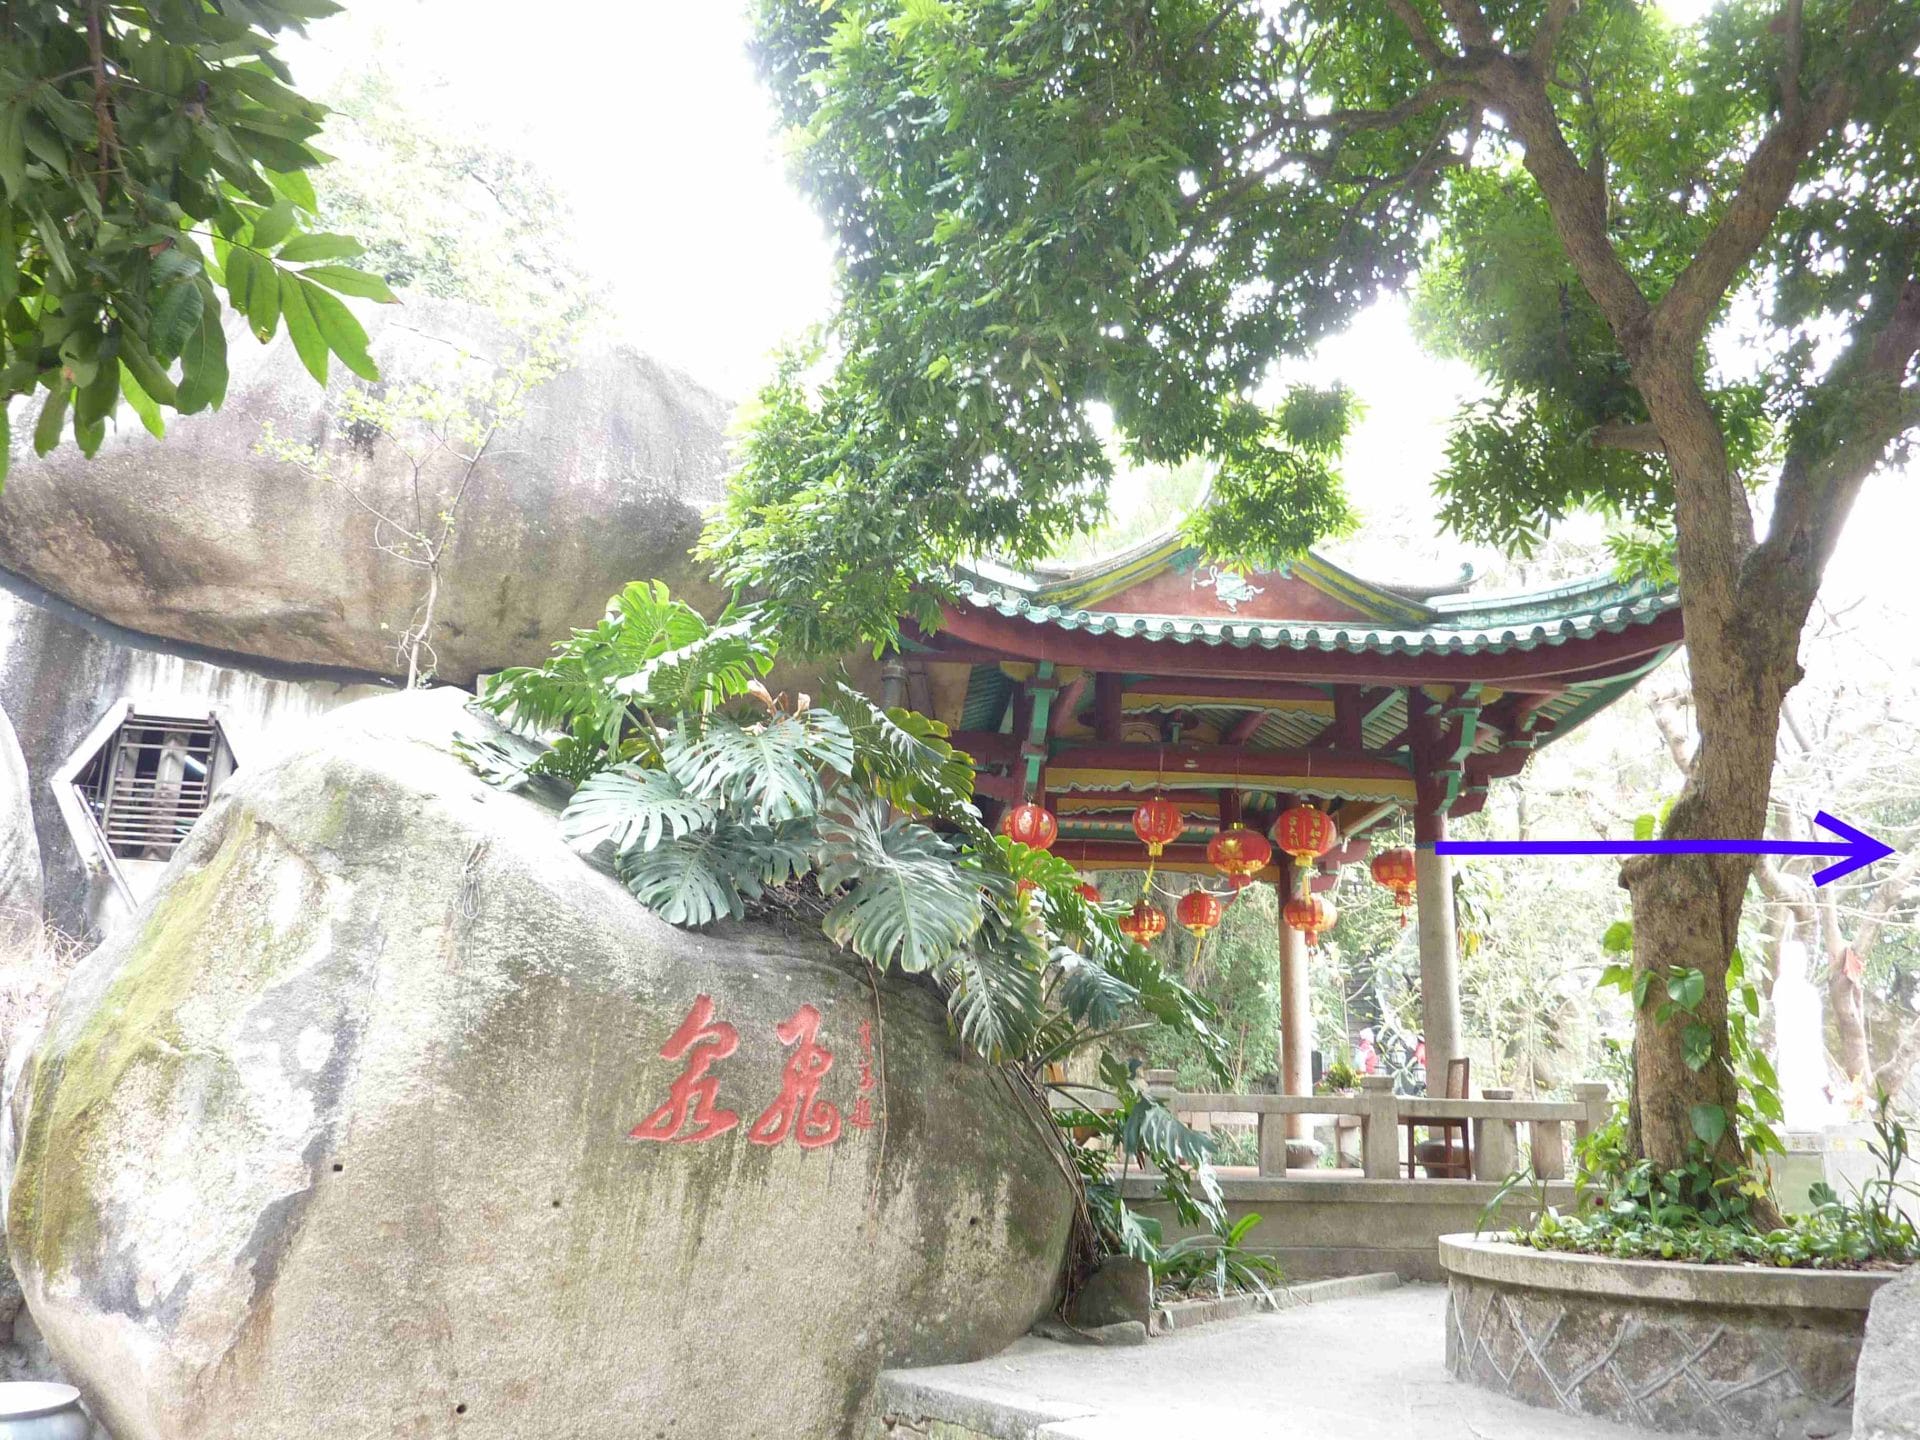 Trimming Feng Shui According to the Nature. The Blue Arrow Shows the Direction of the Temple风水要拿捏得当，关键在于因地制宜